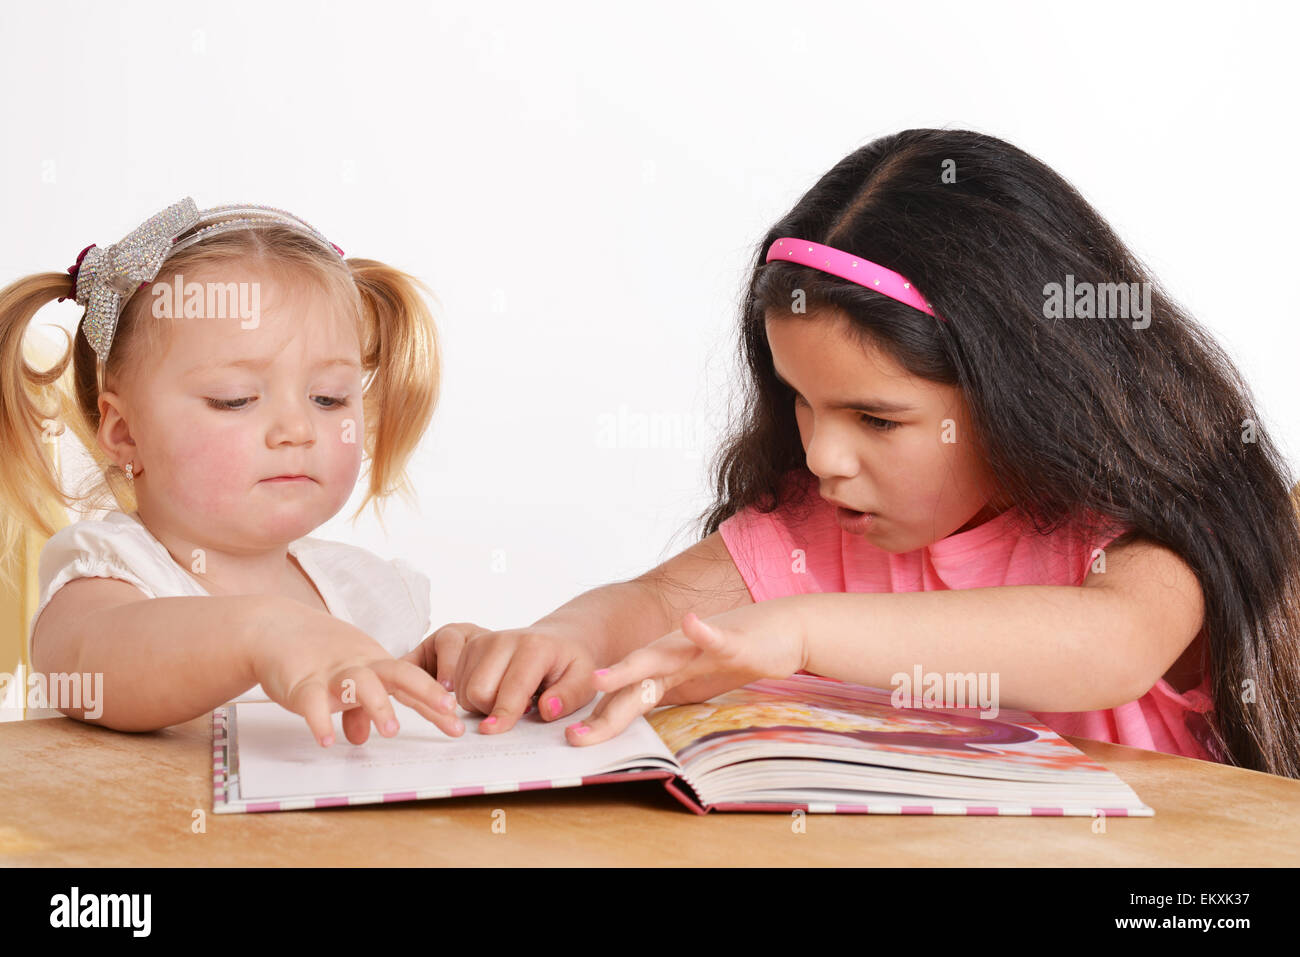 Two young girls reading a book at home Stock Photo